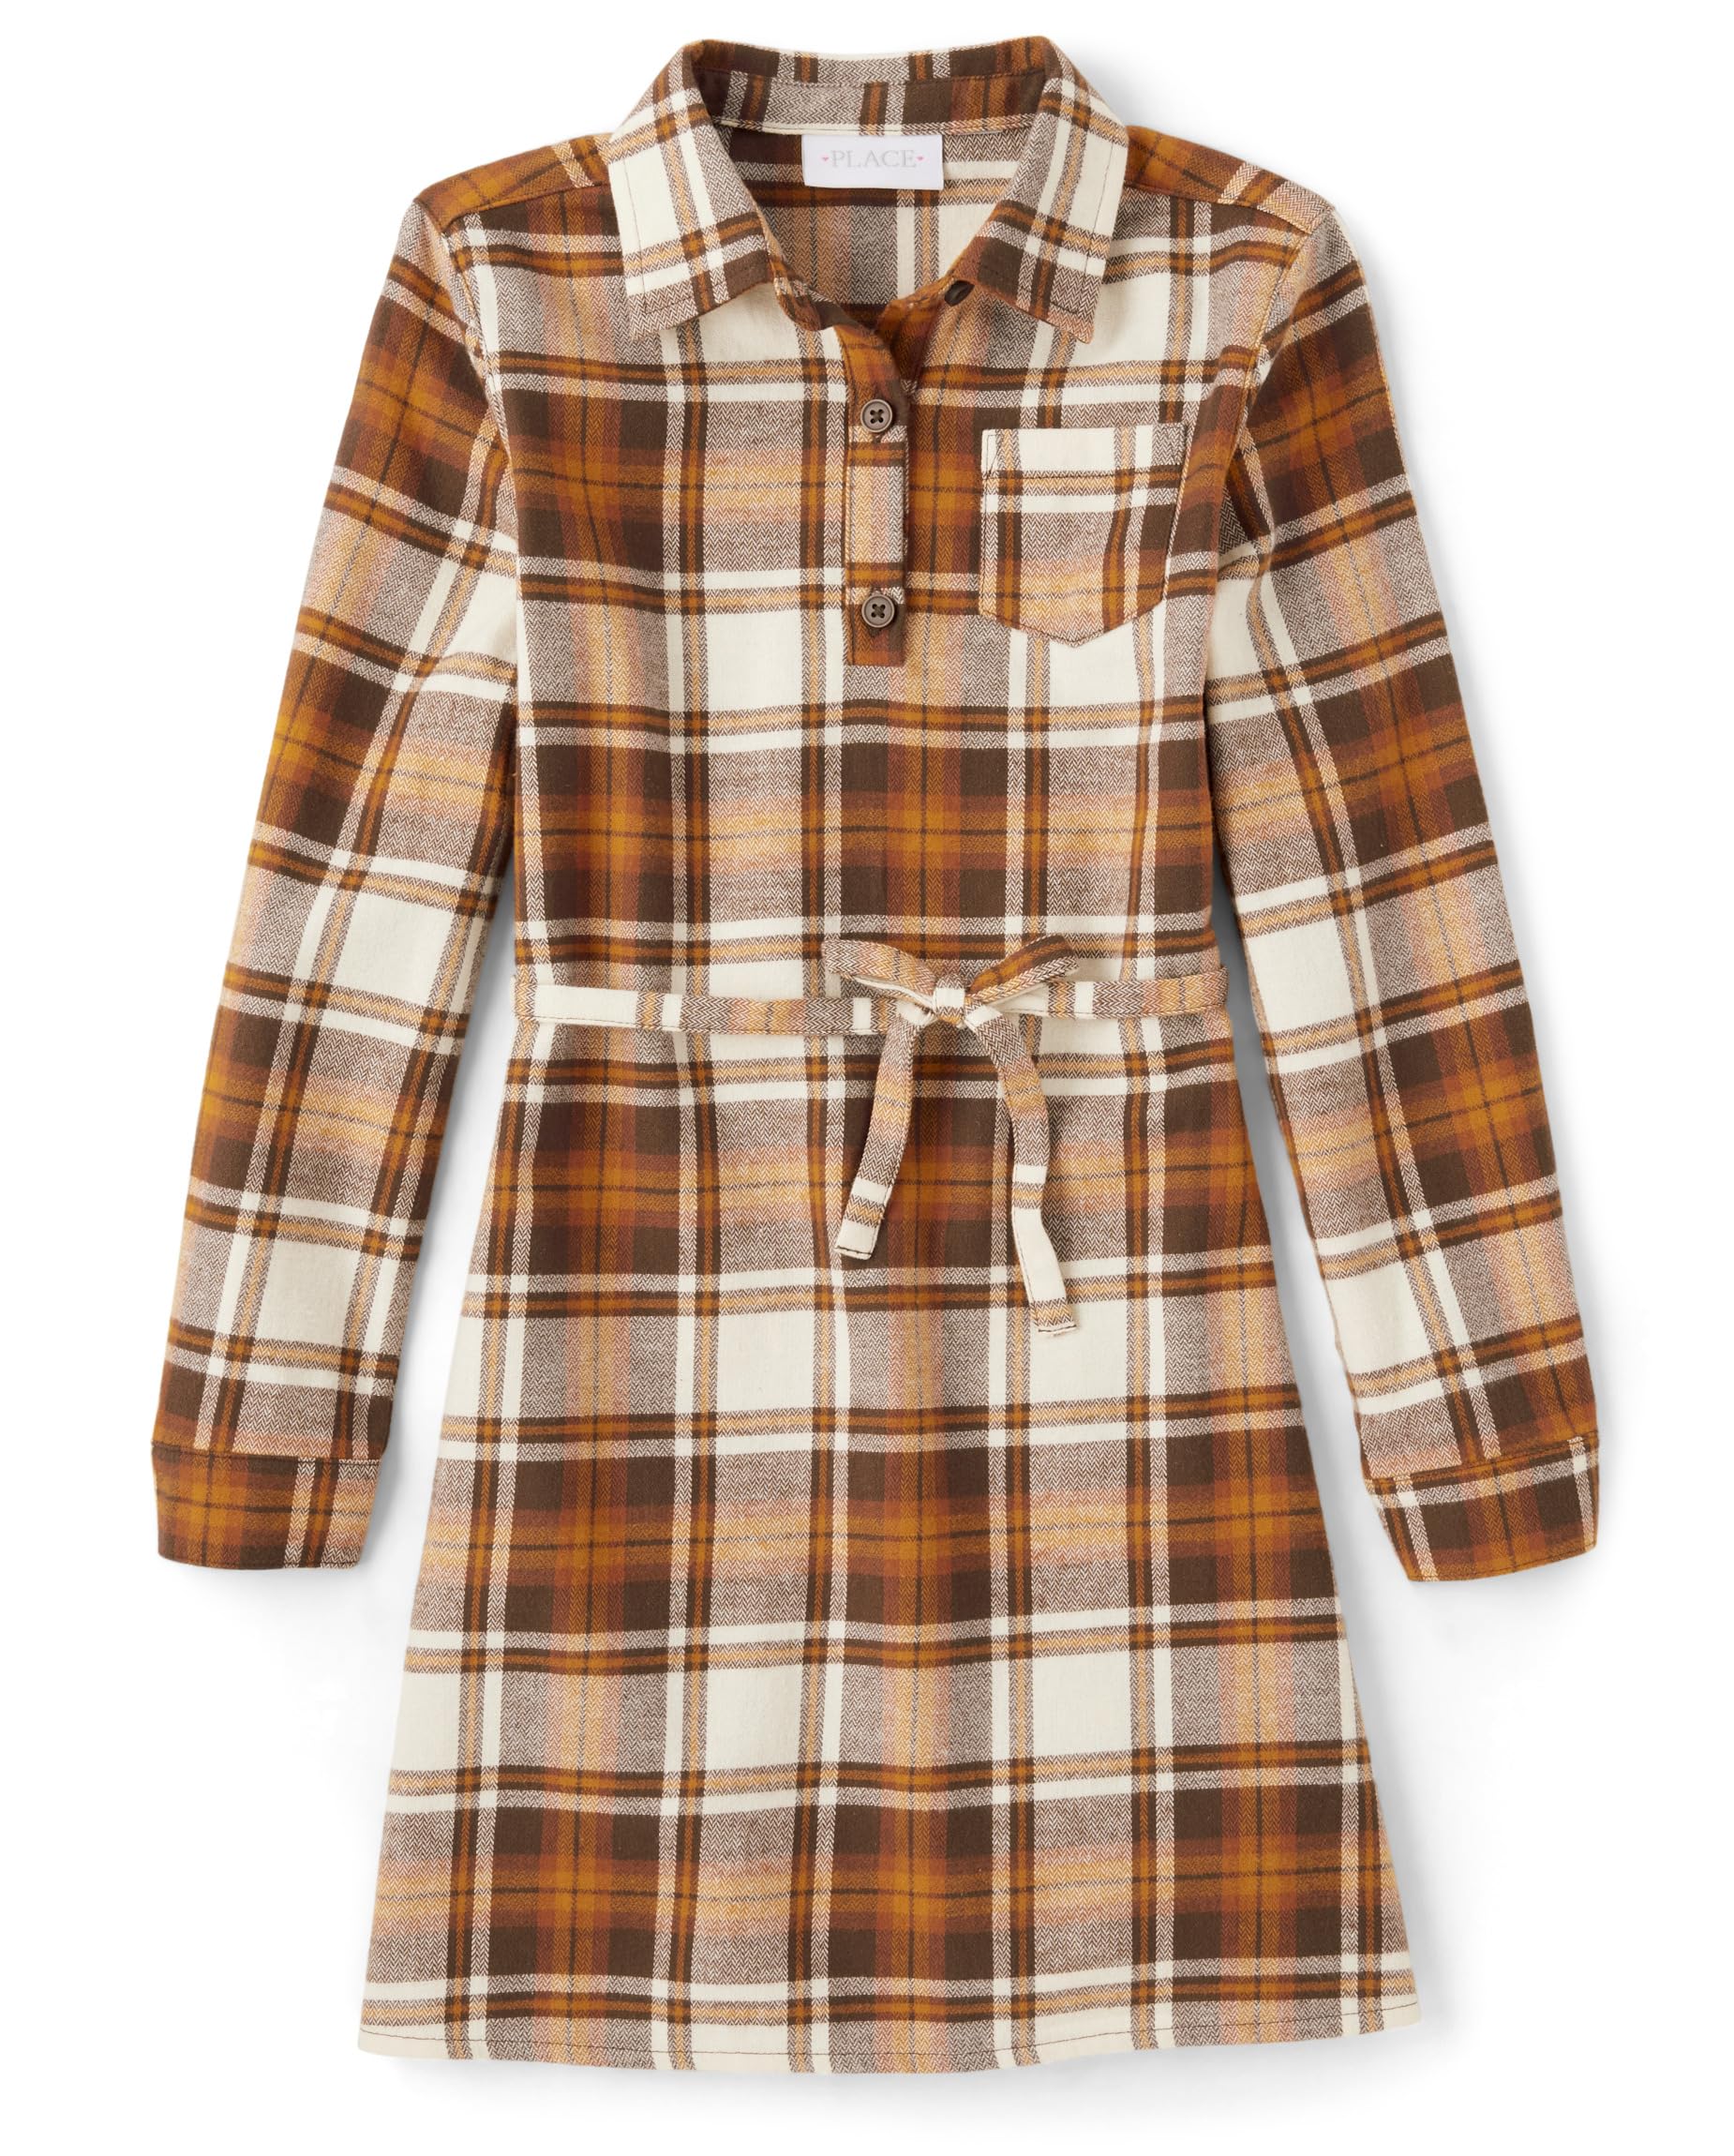 The Children's Place Girls' Long Sleeve Plaid Fall Fashion Dress, HAY Stack, Small $7.99